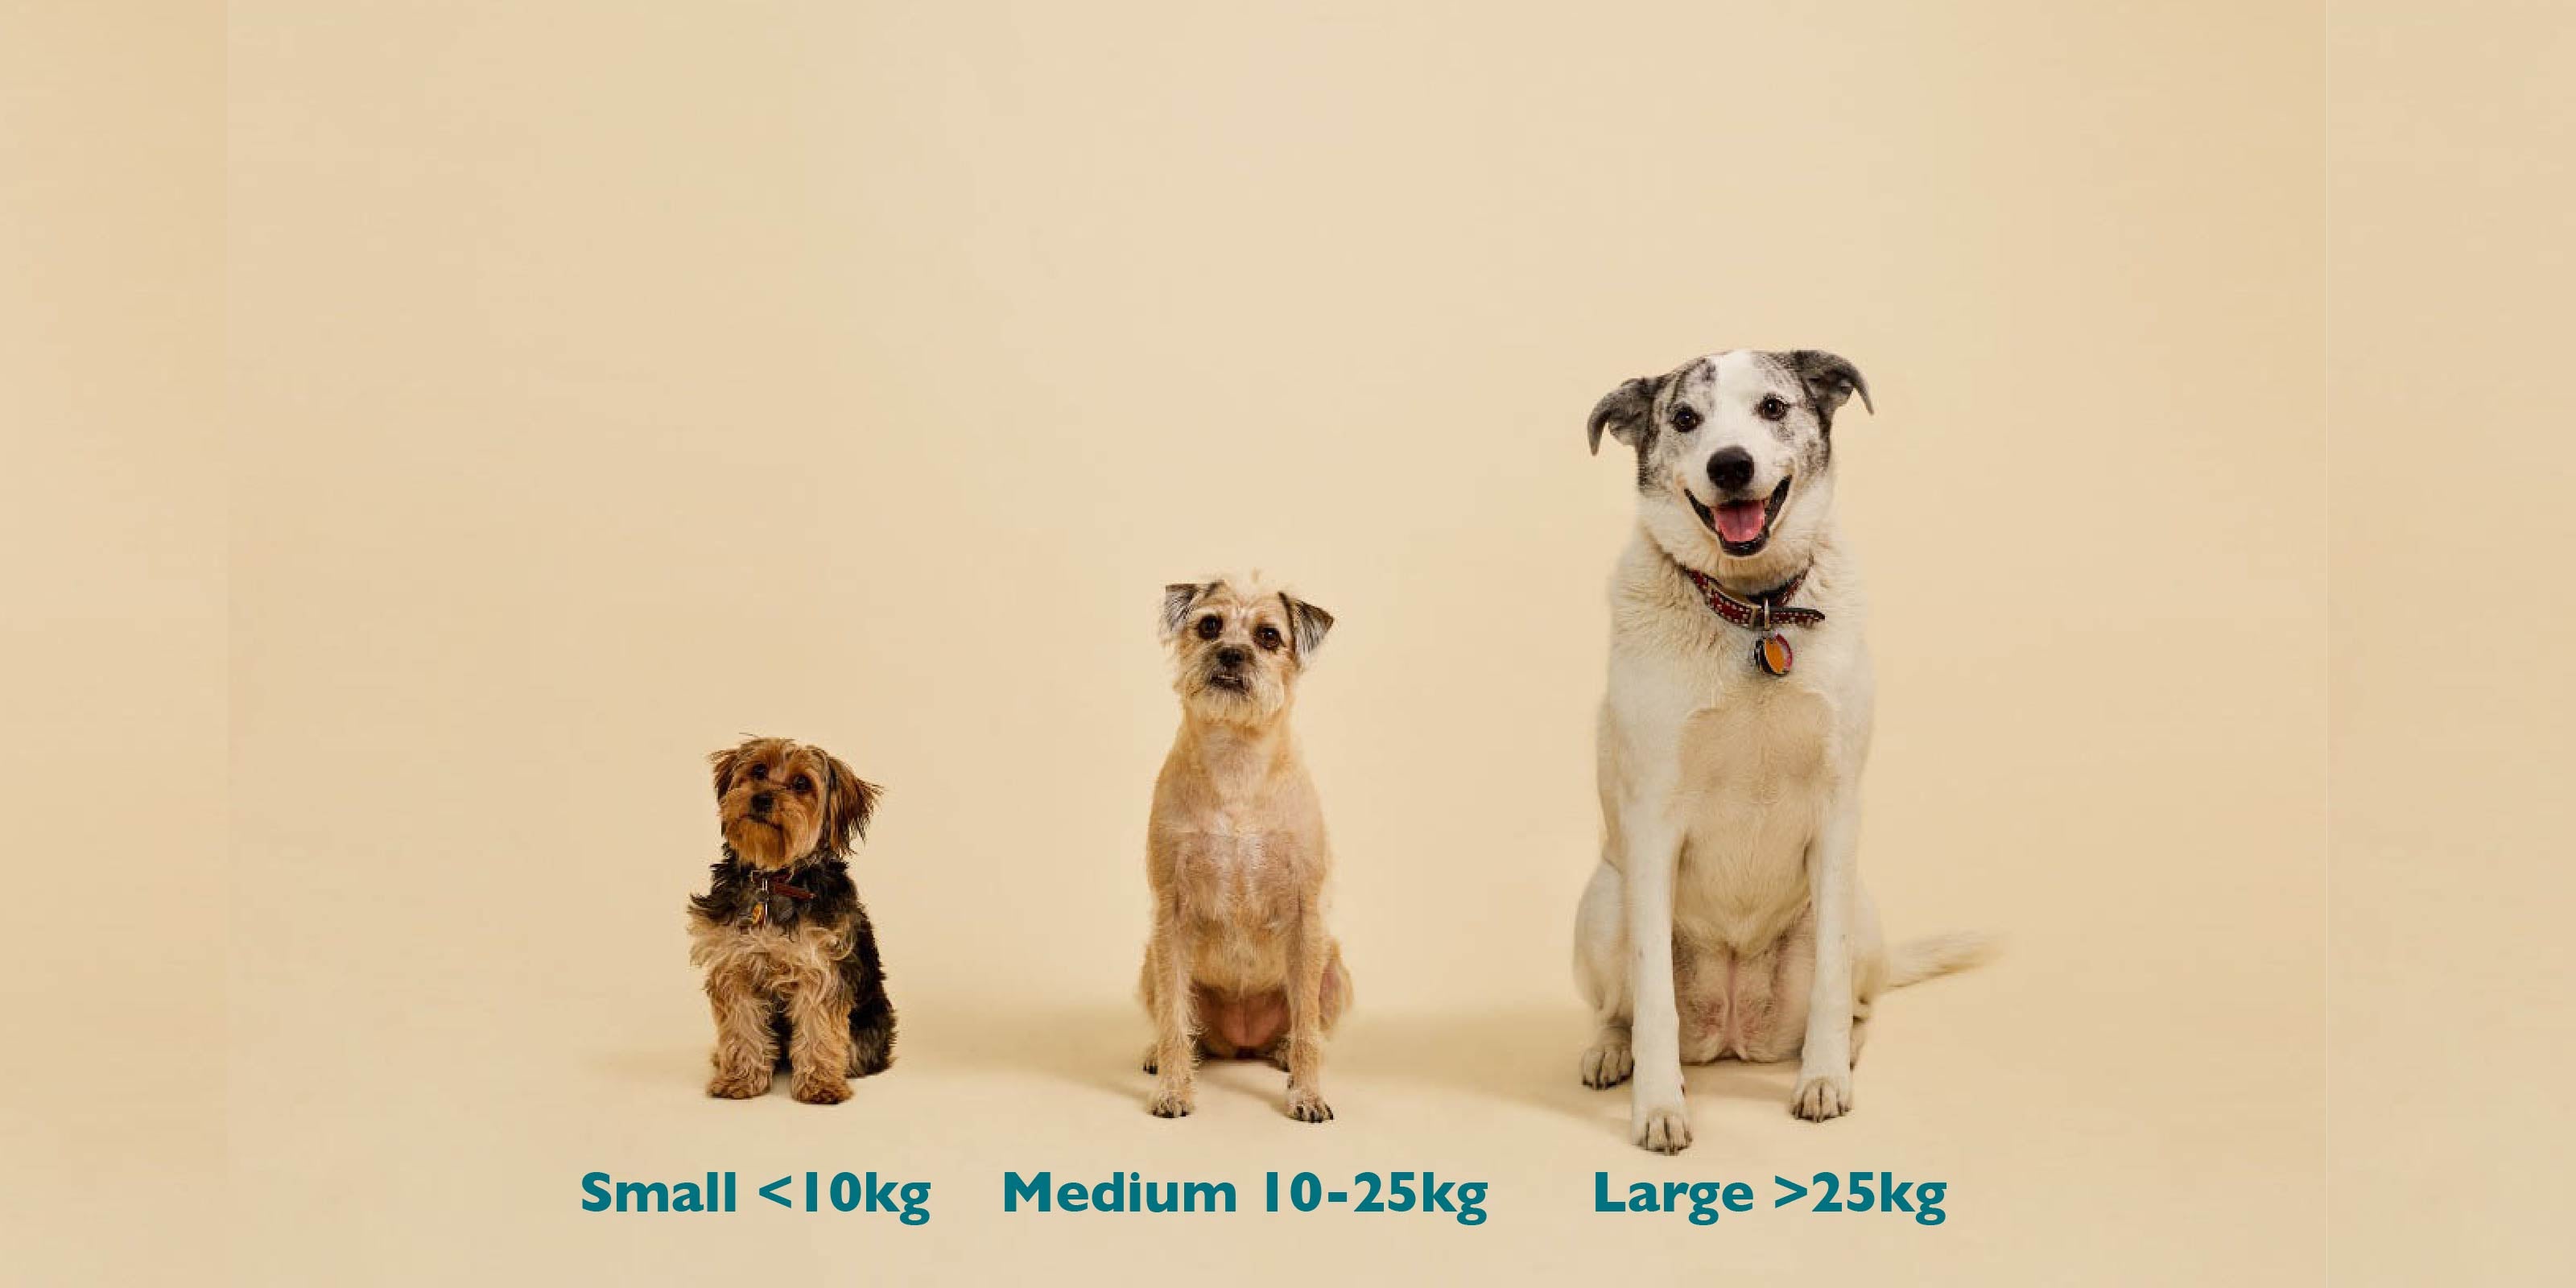 CBD dose for dog as per weight